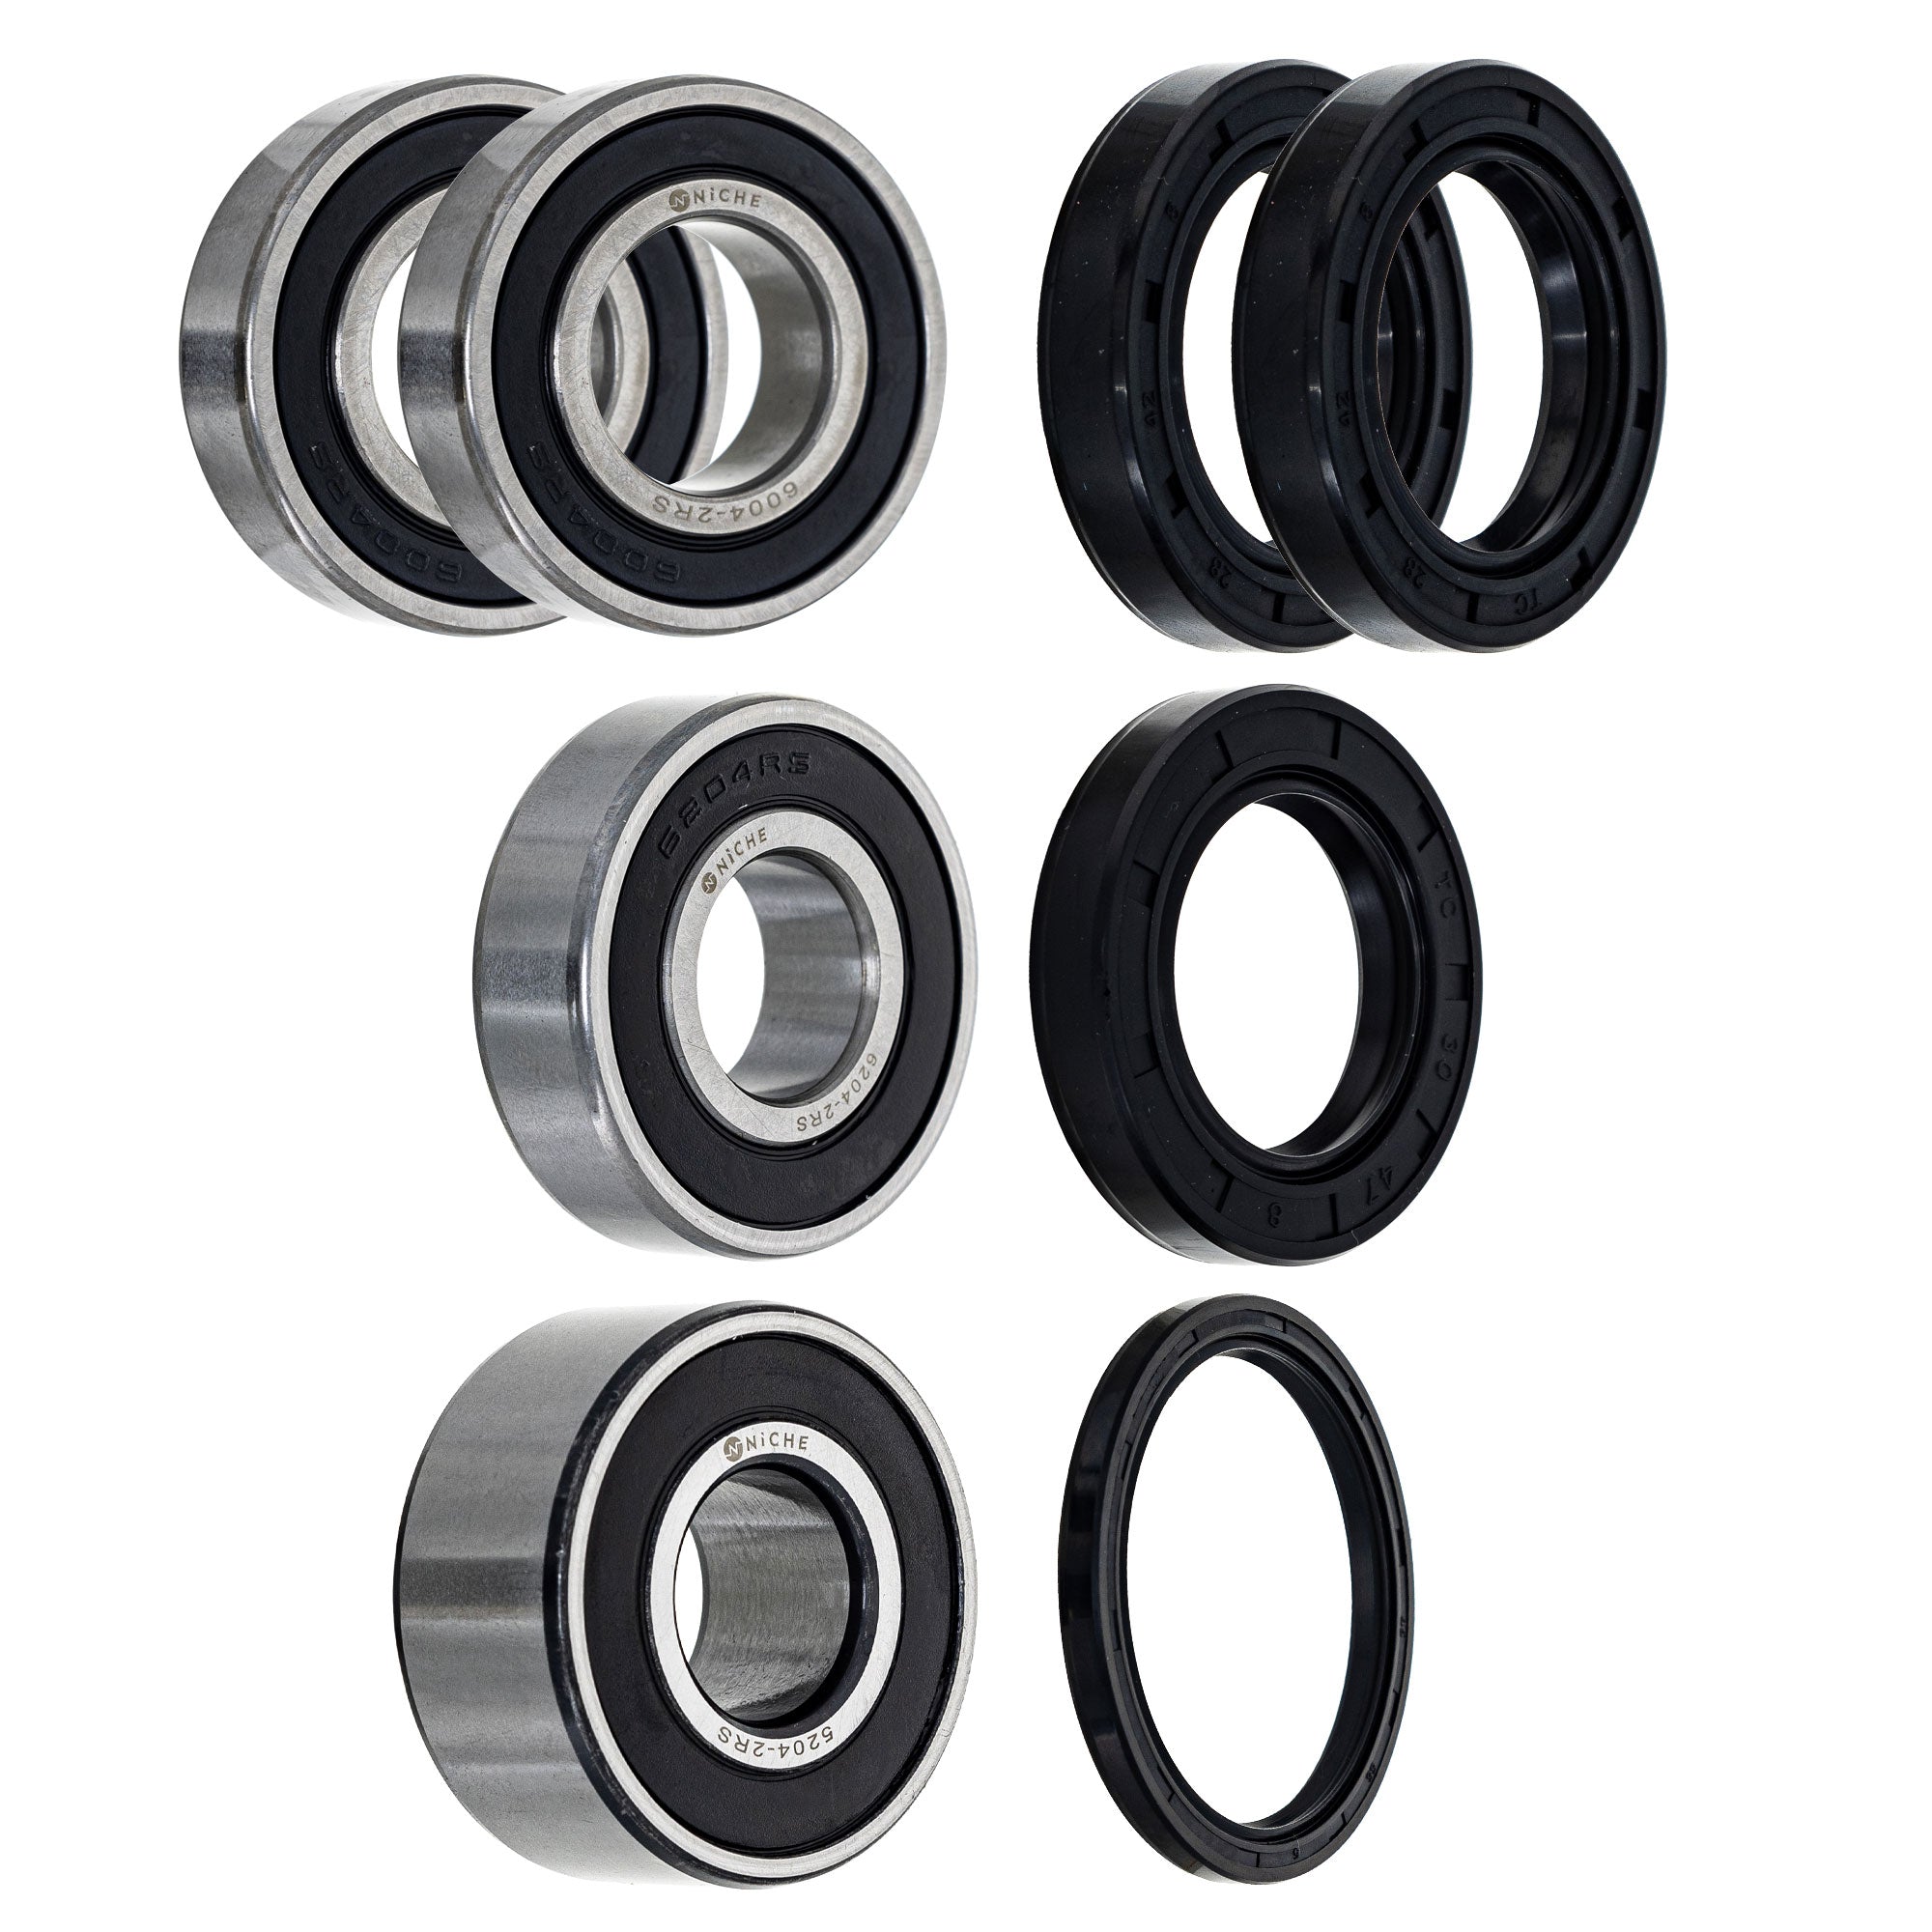 Wheel Bearing Seal Kit for zOTHER Ref No ST1100 NICHE MK1009272